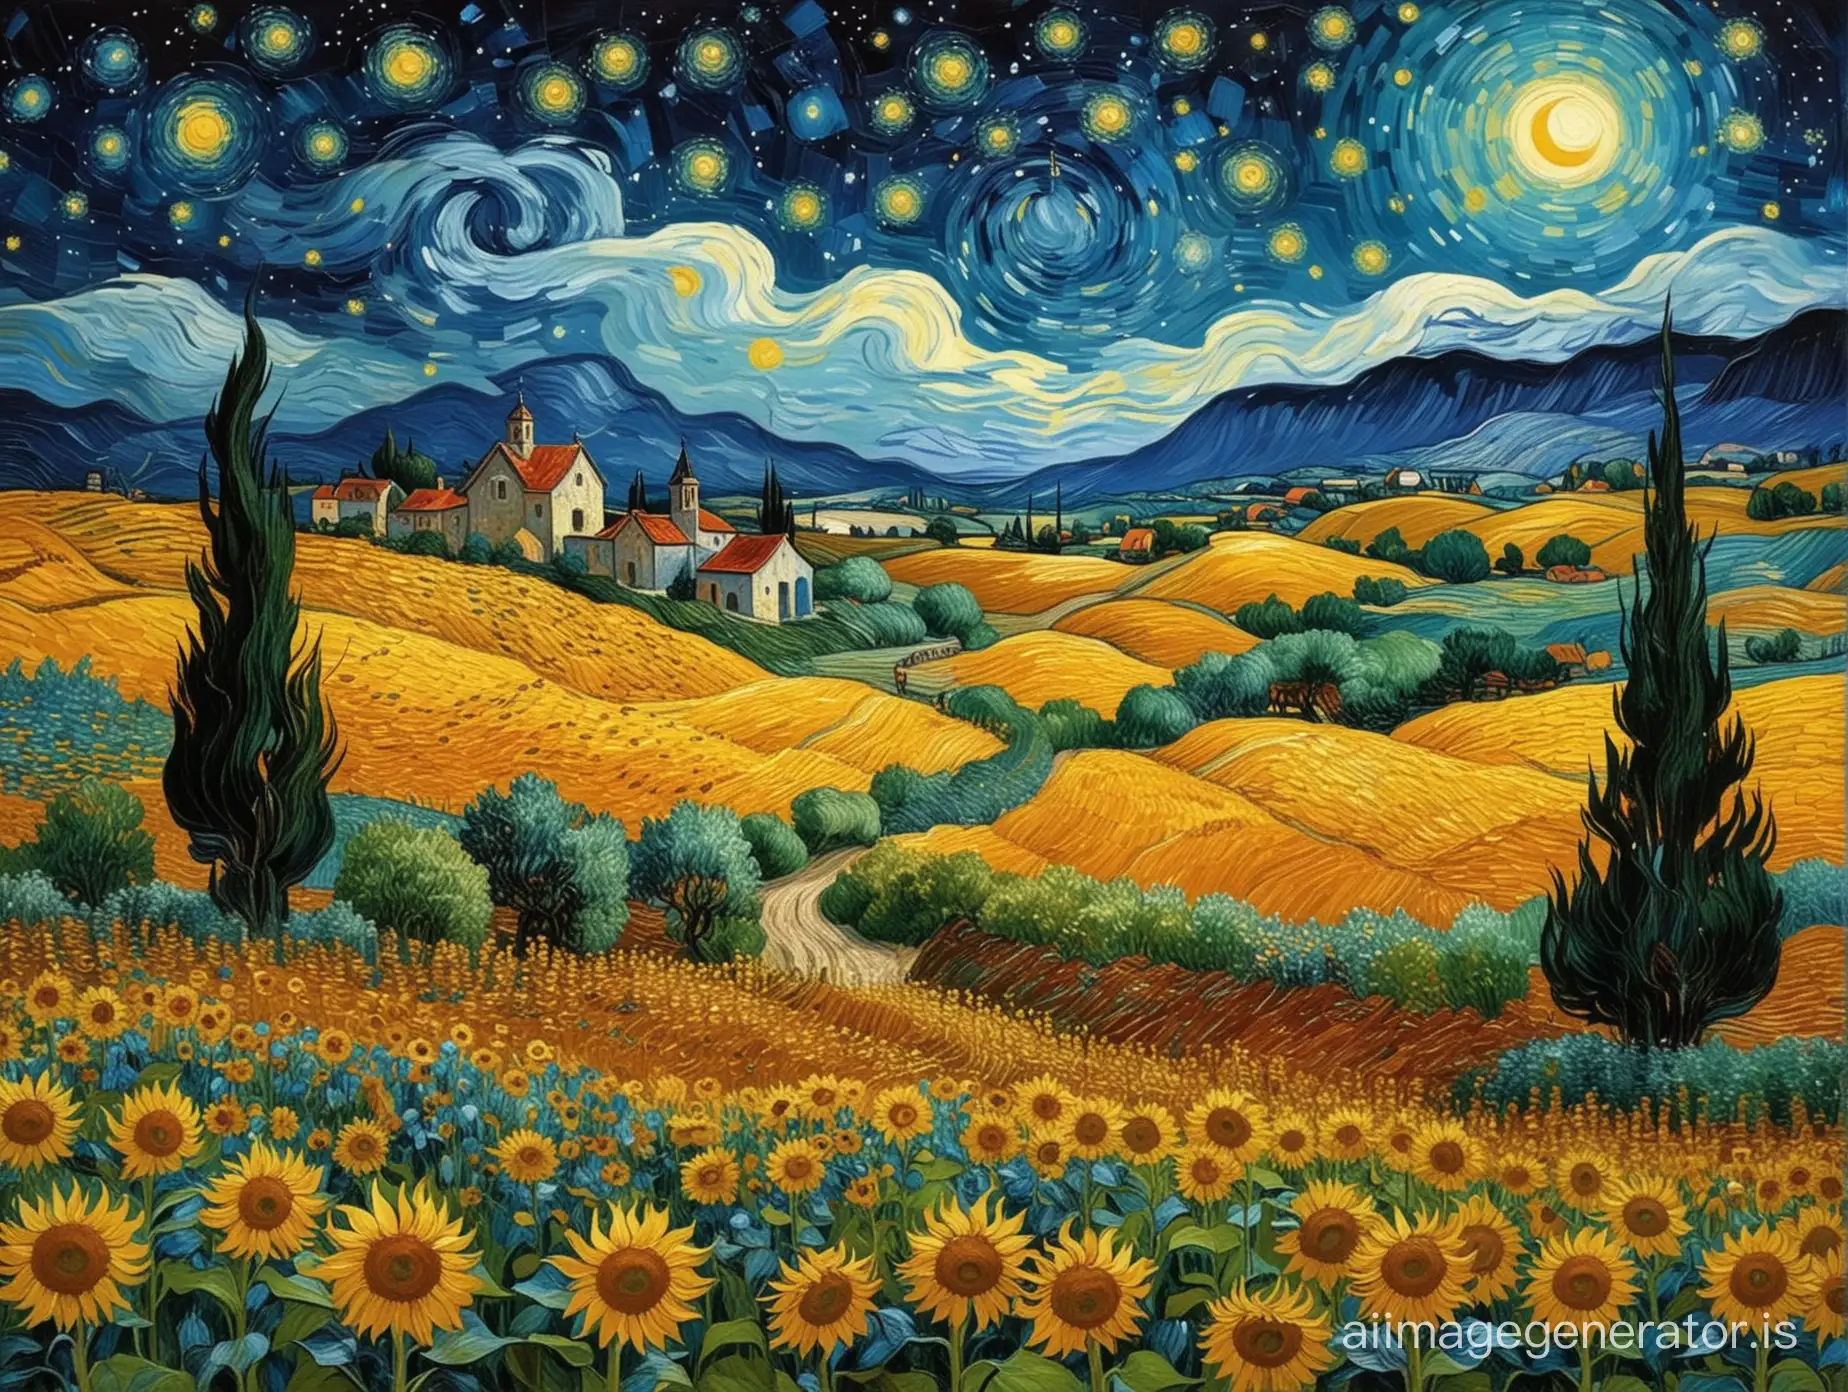 a high-quality symbiosis of van Gogh's "Starry Night" and "Sunflowers" paintings with bright colors and swirling strokes, with starry night skies, a peaceful village and rolling hills. The picture should dominantly show sunflower field. the Scene should evoke a sense of calm and beauty, with a touch of impressionism and expressionism. Colours should be rich and bold, with quality similar to sleep. The general composition should be balanced and harmonious, reflecting the essence of the landscape, which is felt both habitually and otherworldly. The image should be detailed, with intricate textures and layers that add depth to the painting. This work should be suitable for gallery display, showcasing the beauty of nature in a unique and fascinating way.